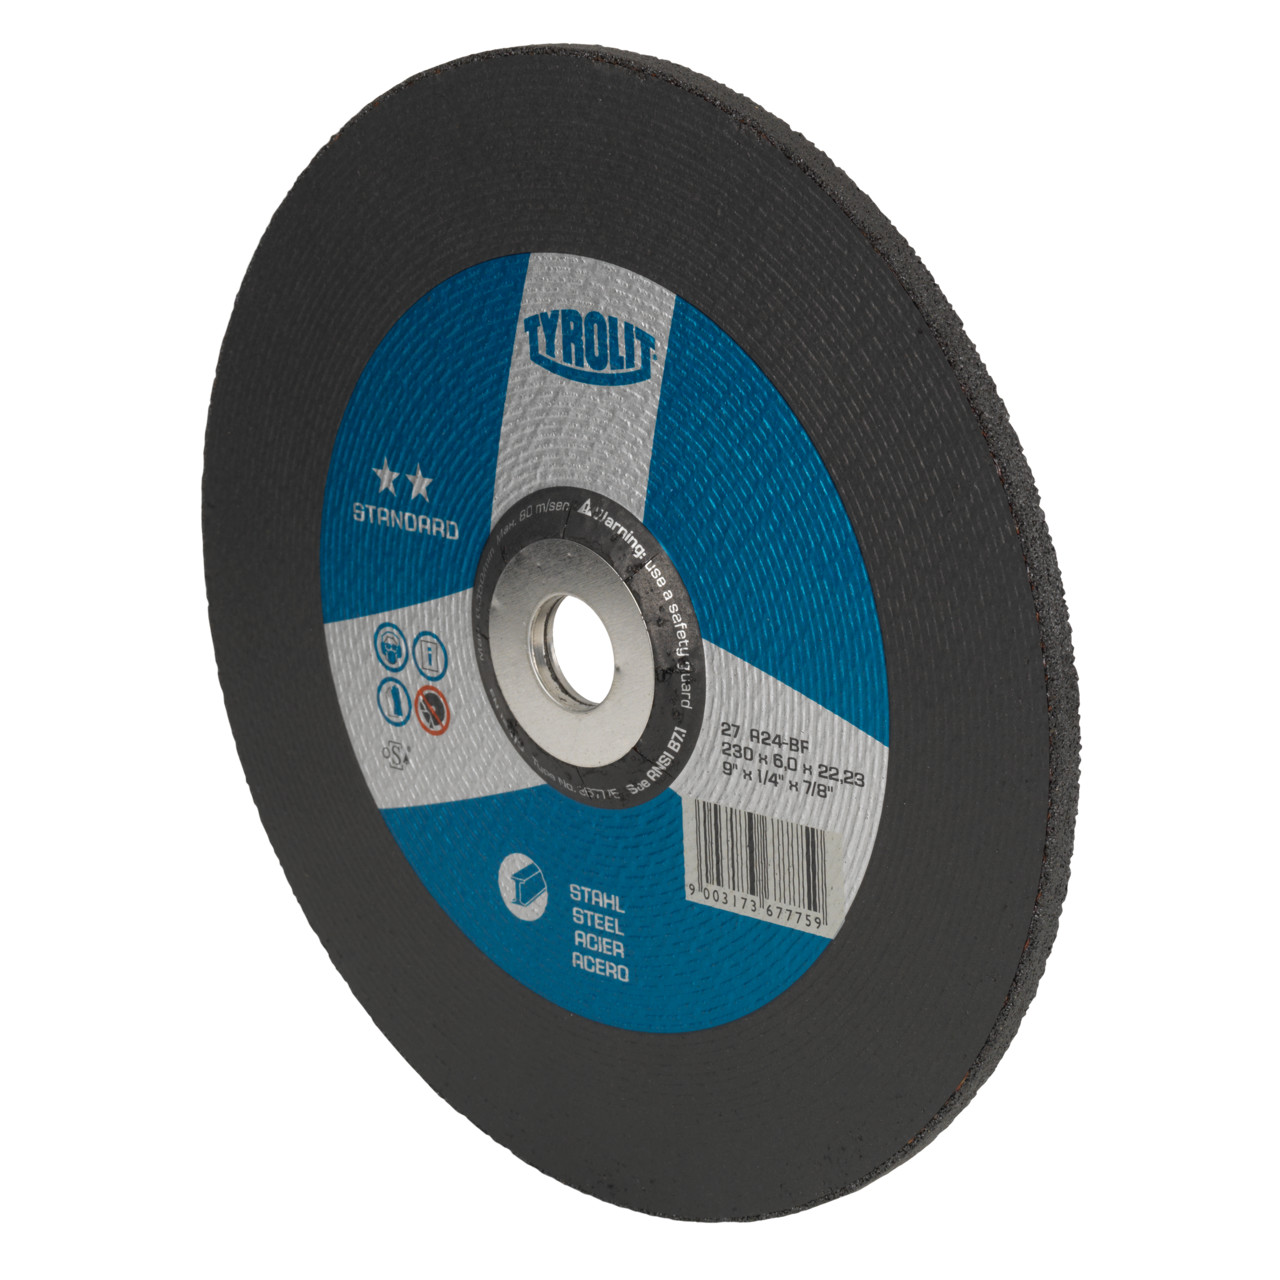 Tyrolit Roughing disc DxUxH 178x6x22.23 For steel, shape: 27 - offset version, Art. 367773